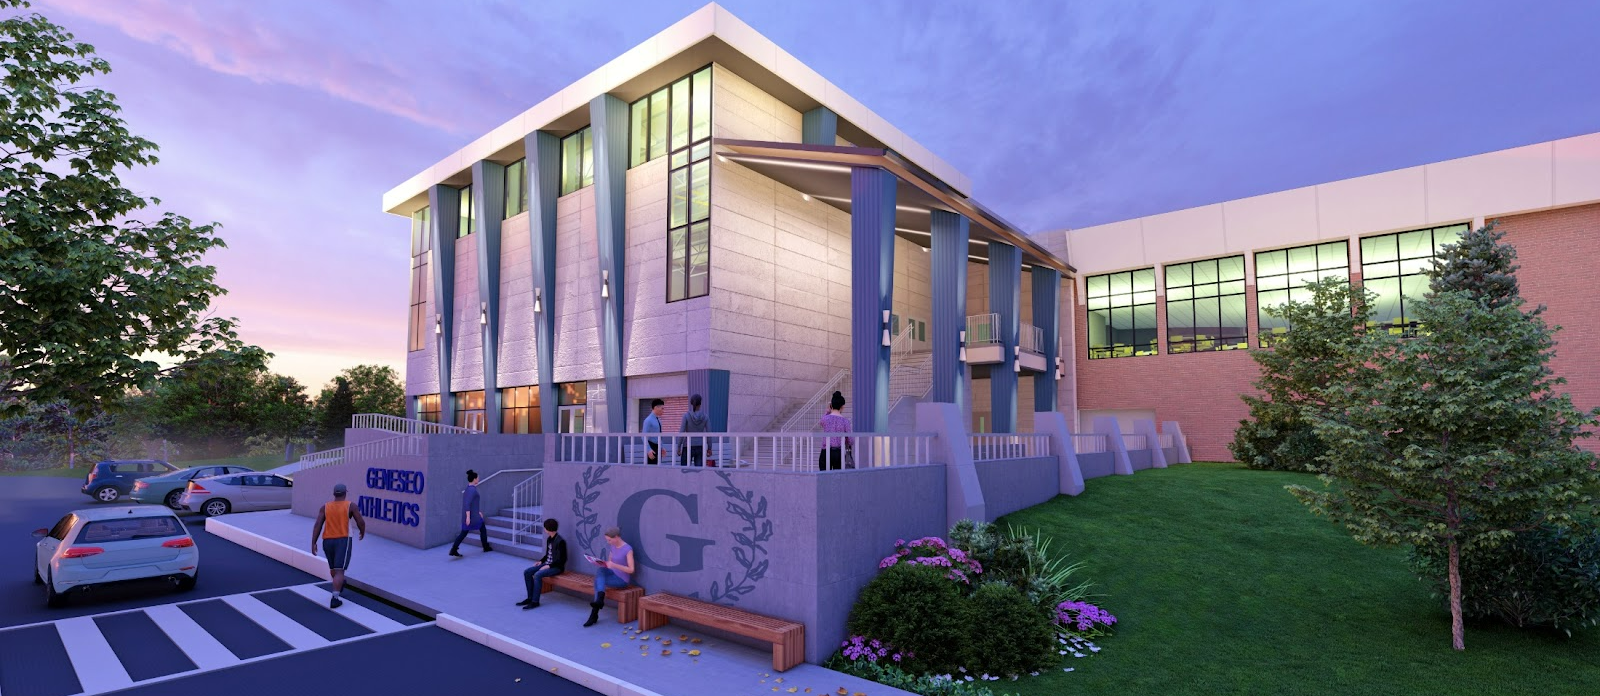 Rendering of athletic facility